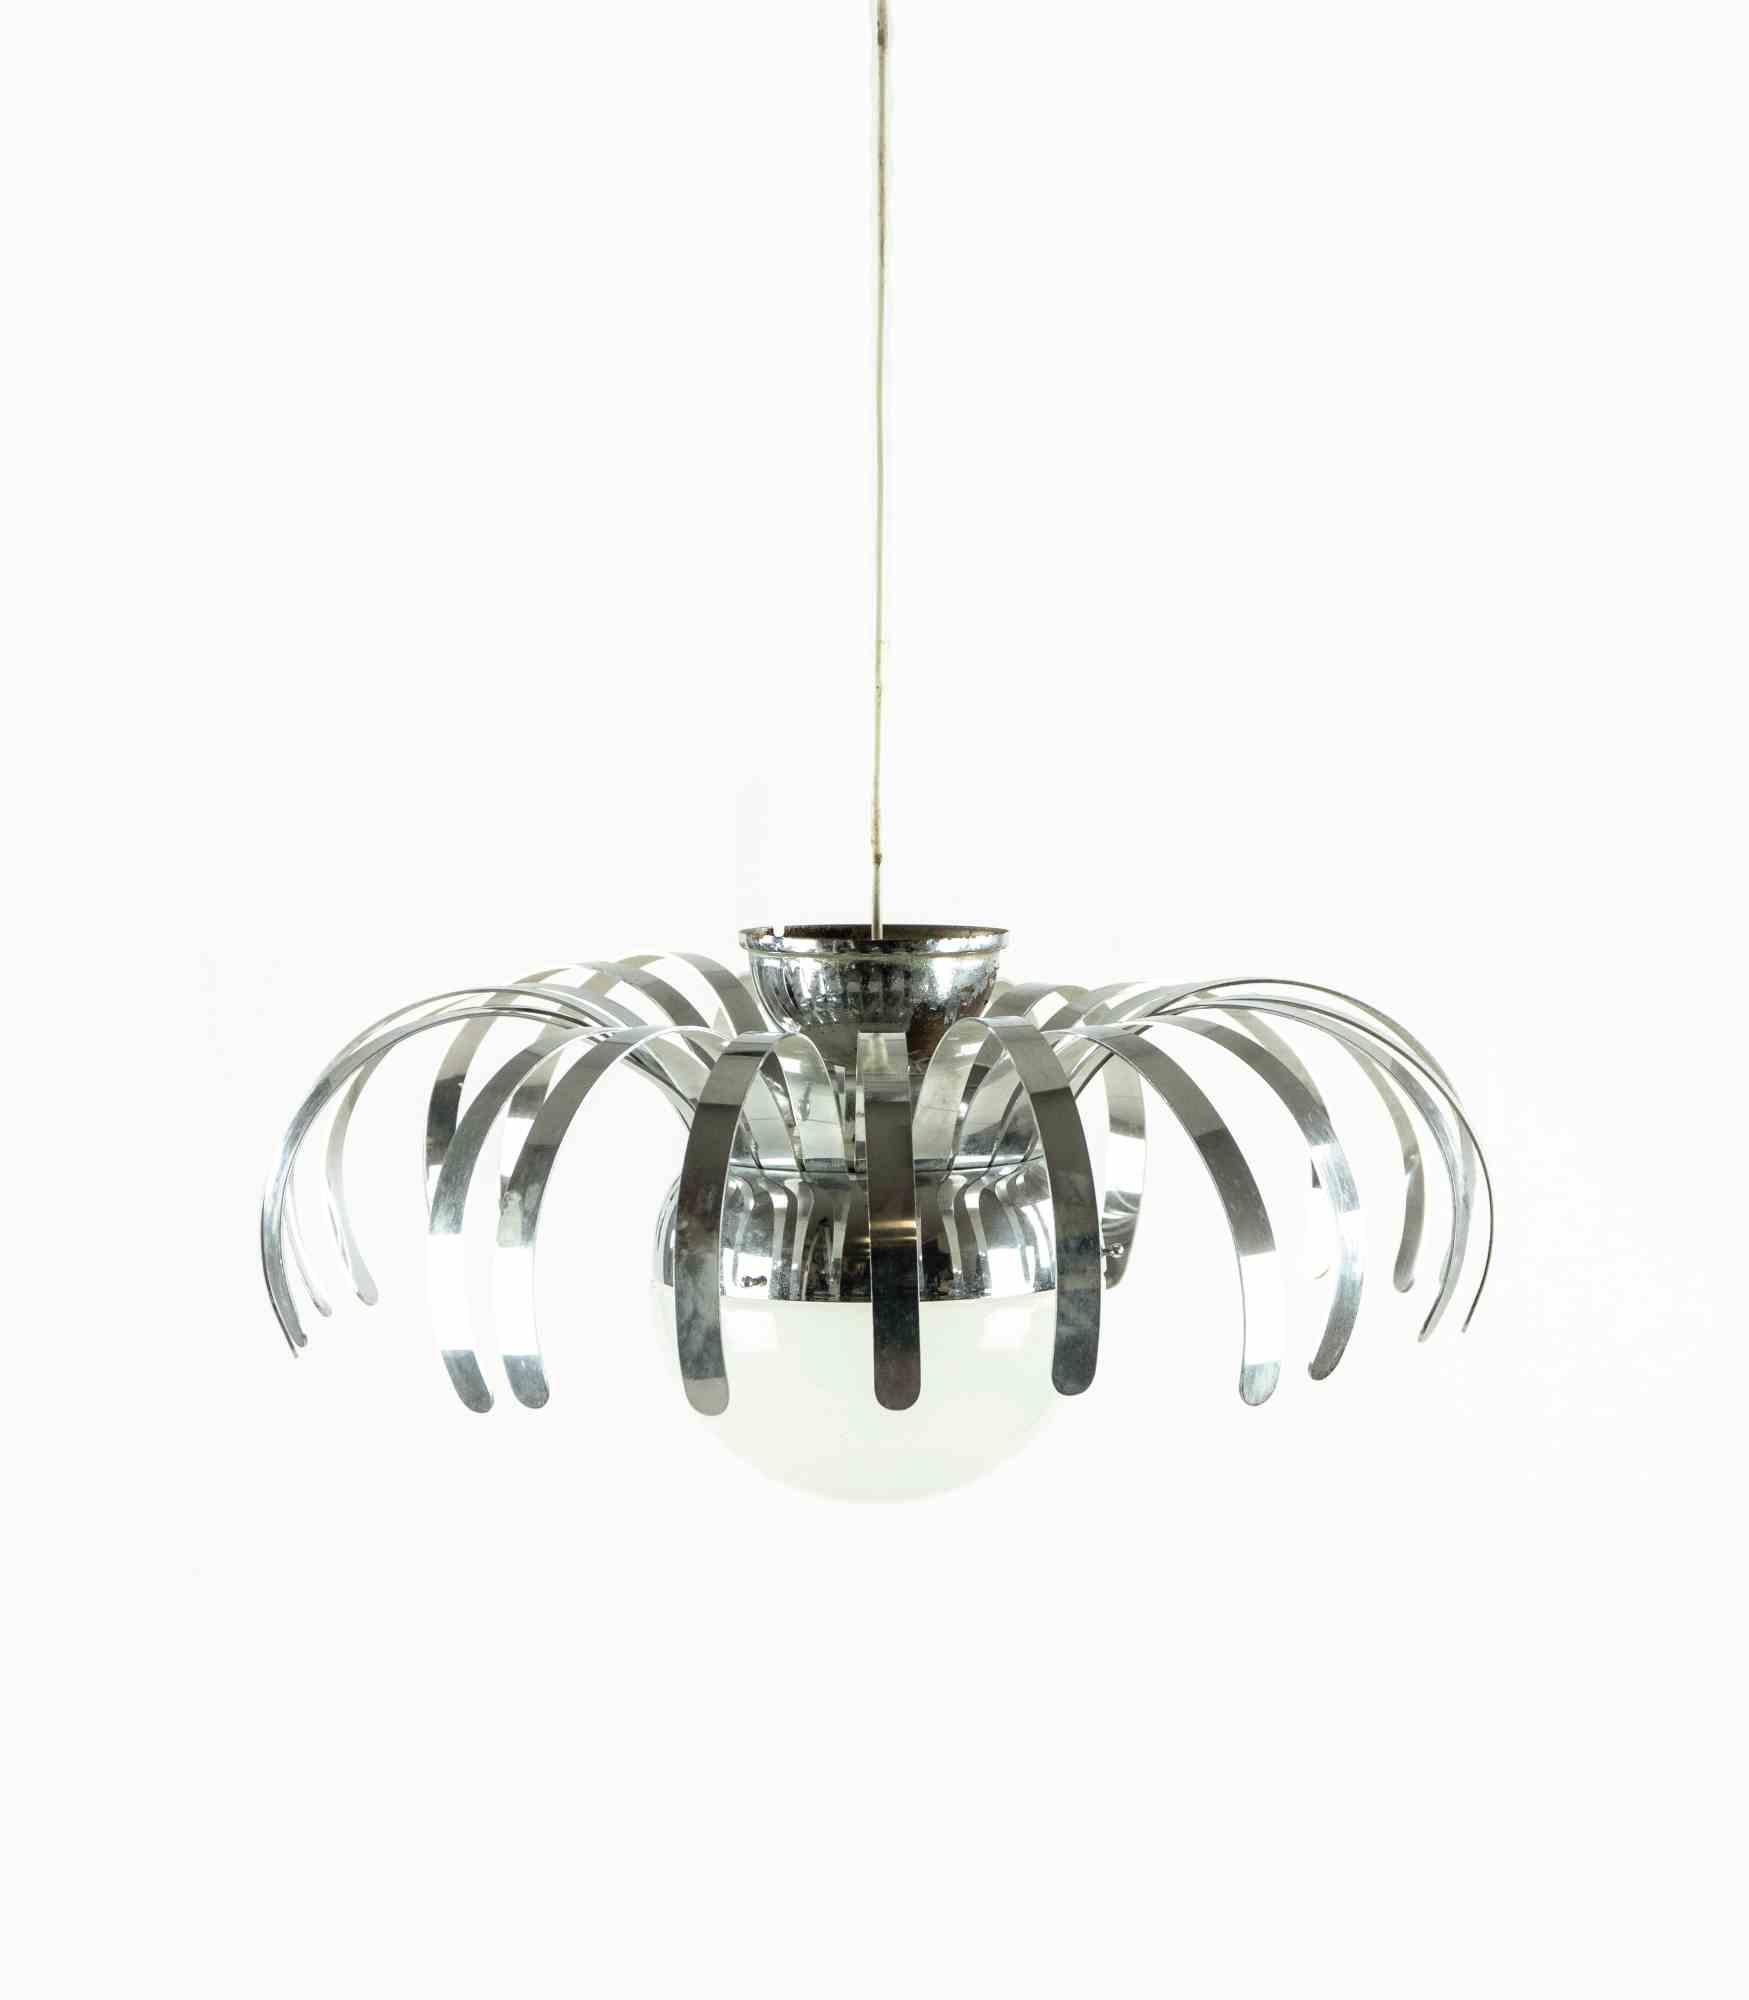 Space age spider lamp is a contemprary design lamp realized in the half of 20th Century.

A unique table lamp entirely realized with a chrome spider shape structure.

Mint conditions

Amaze your guest with this amazing lamp!